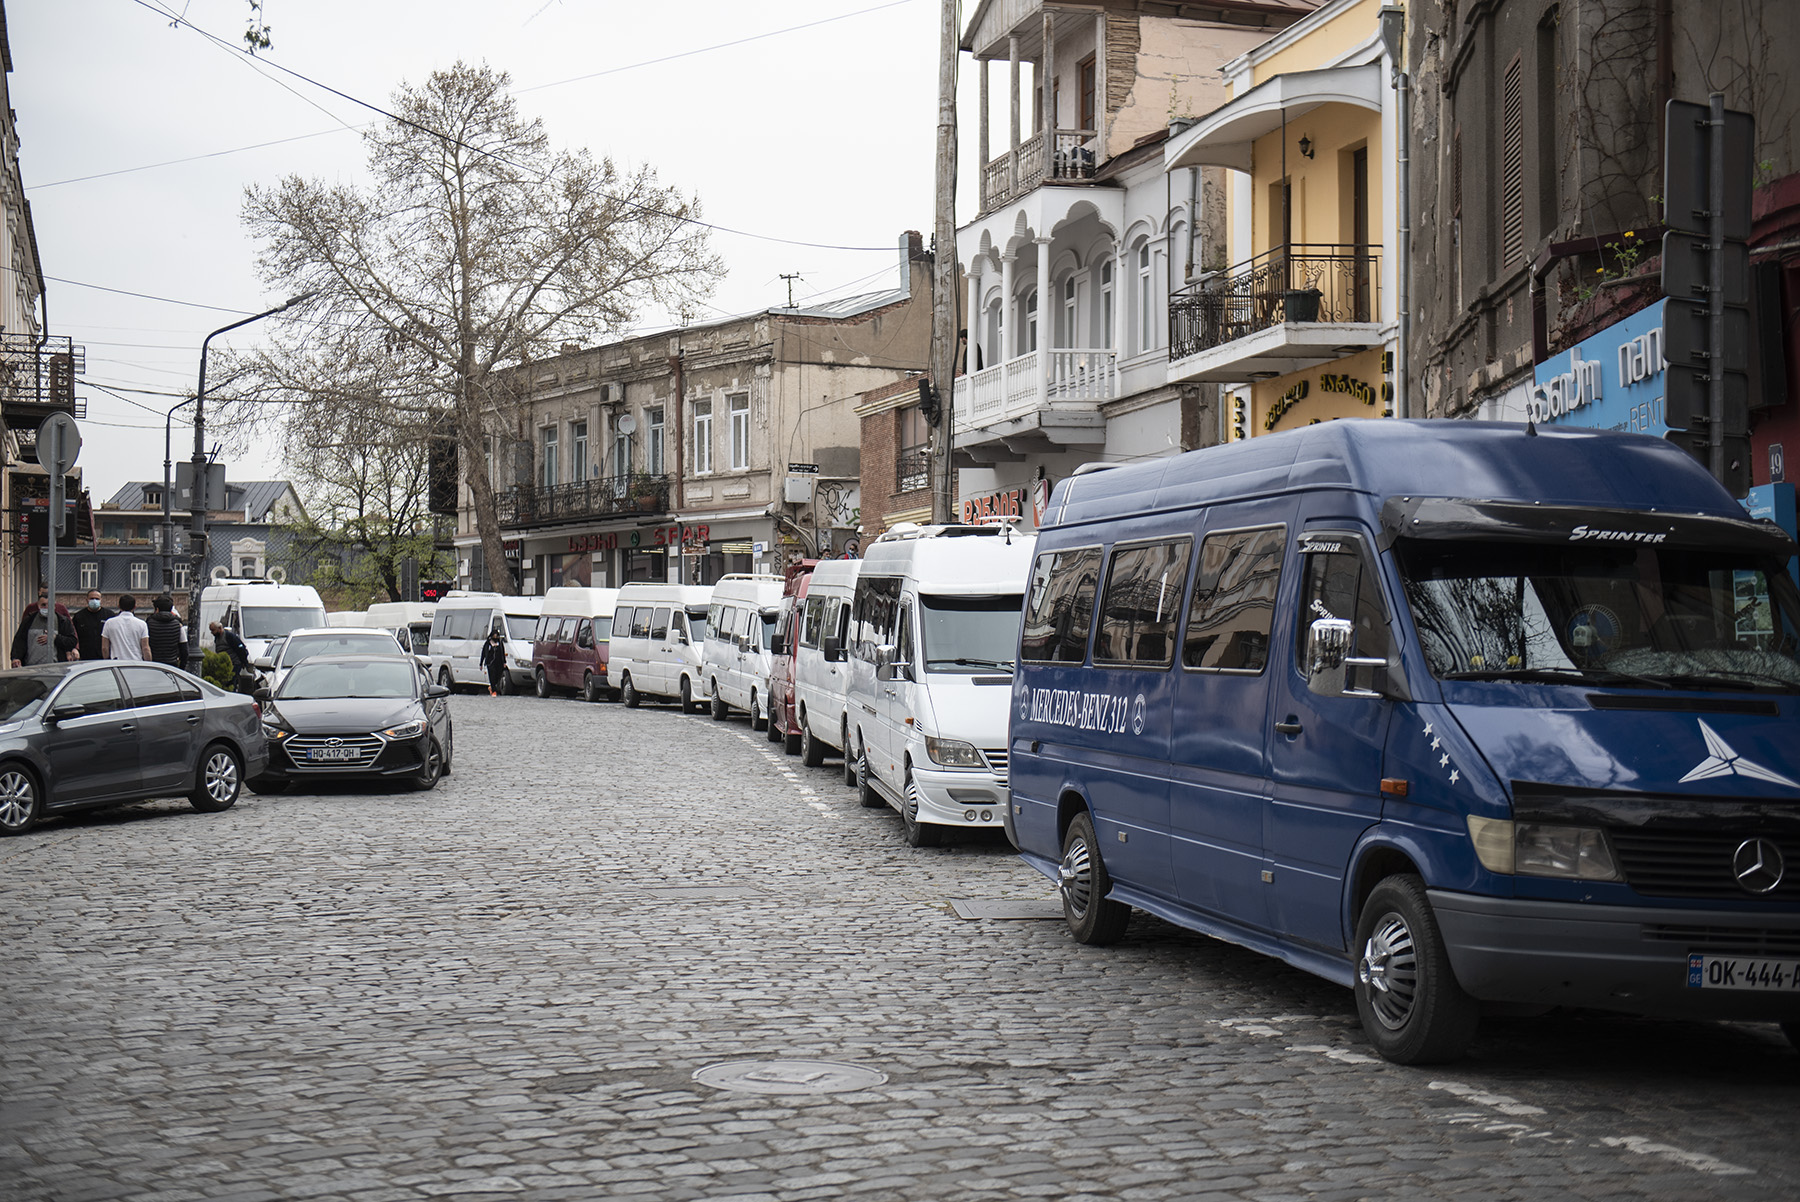 Dozens of minibuses lined several streets close to the demonstration. Photo: Mariam Nikuradze/OC Media.